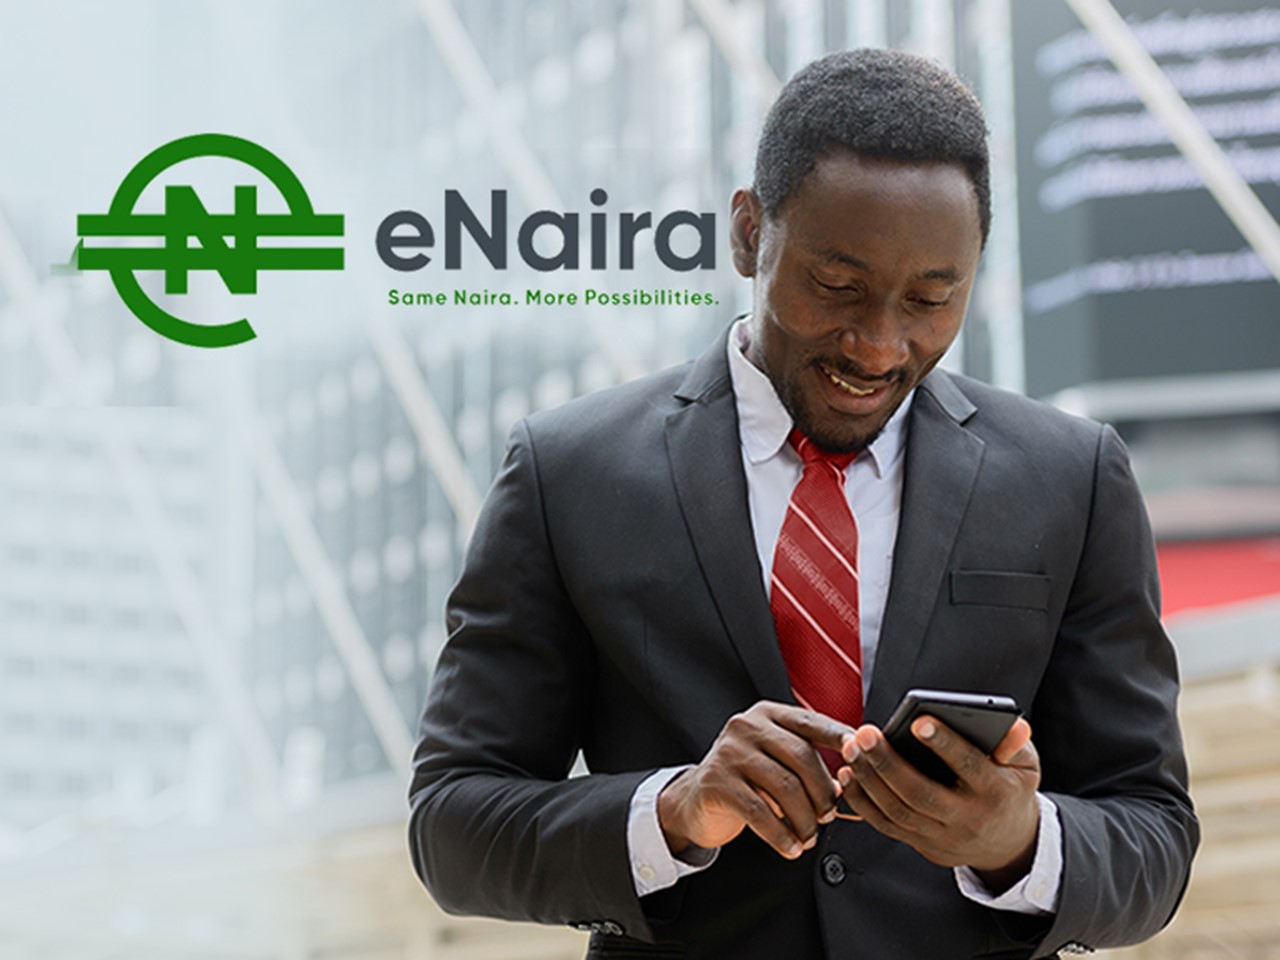 eNaira and What it Means for Cross-Border Payments in Nigeria